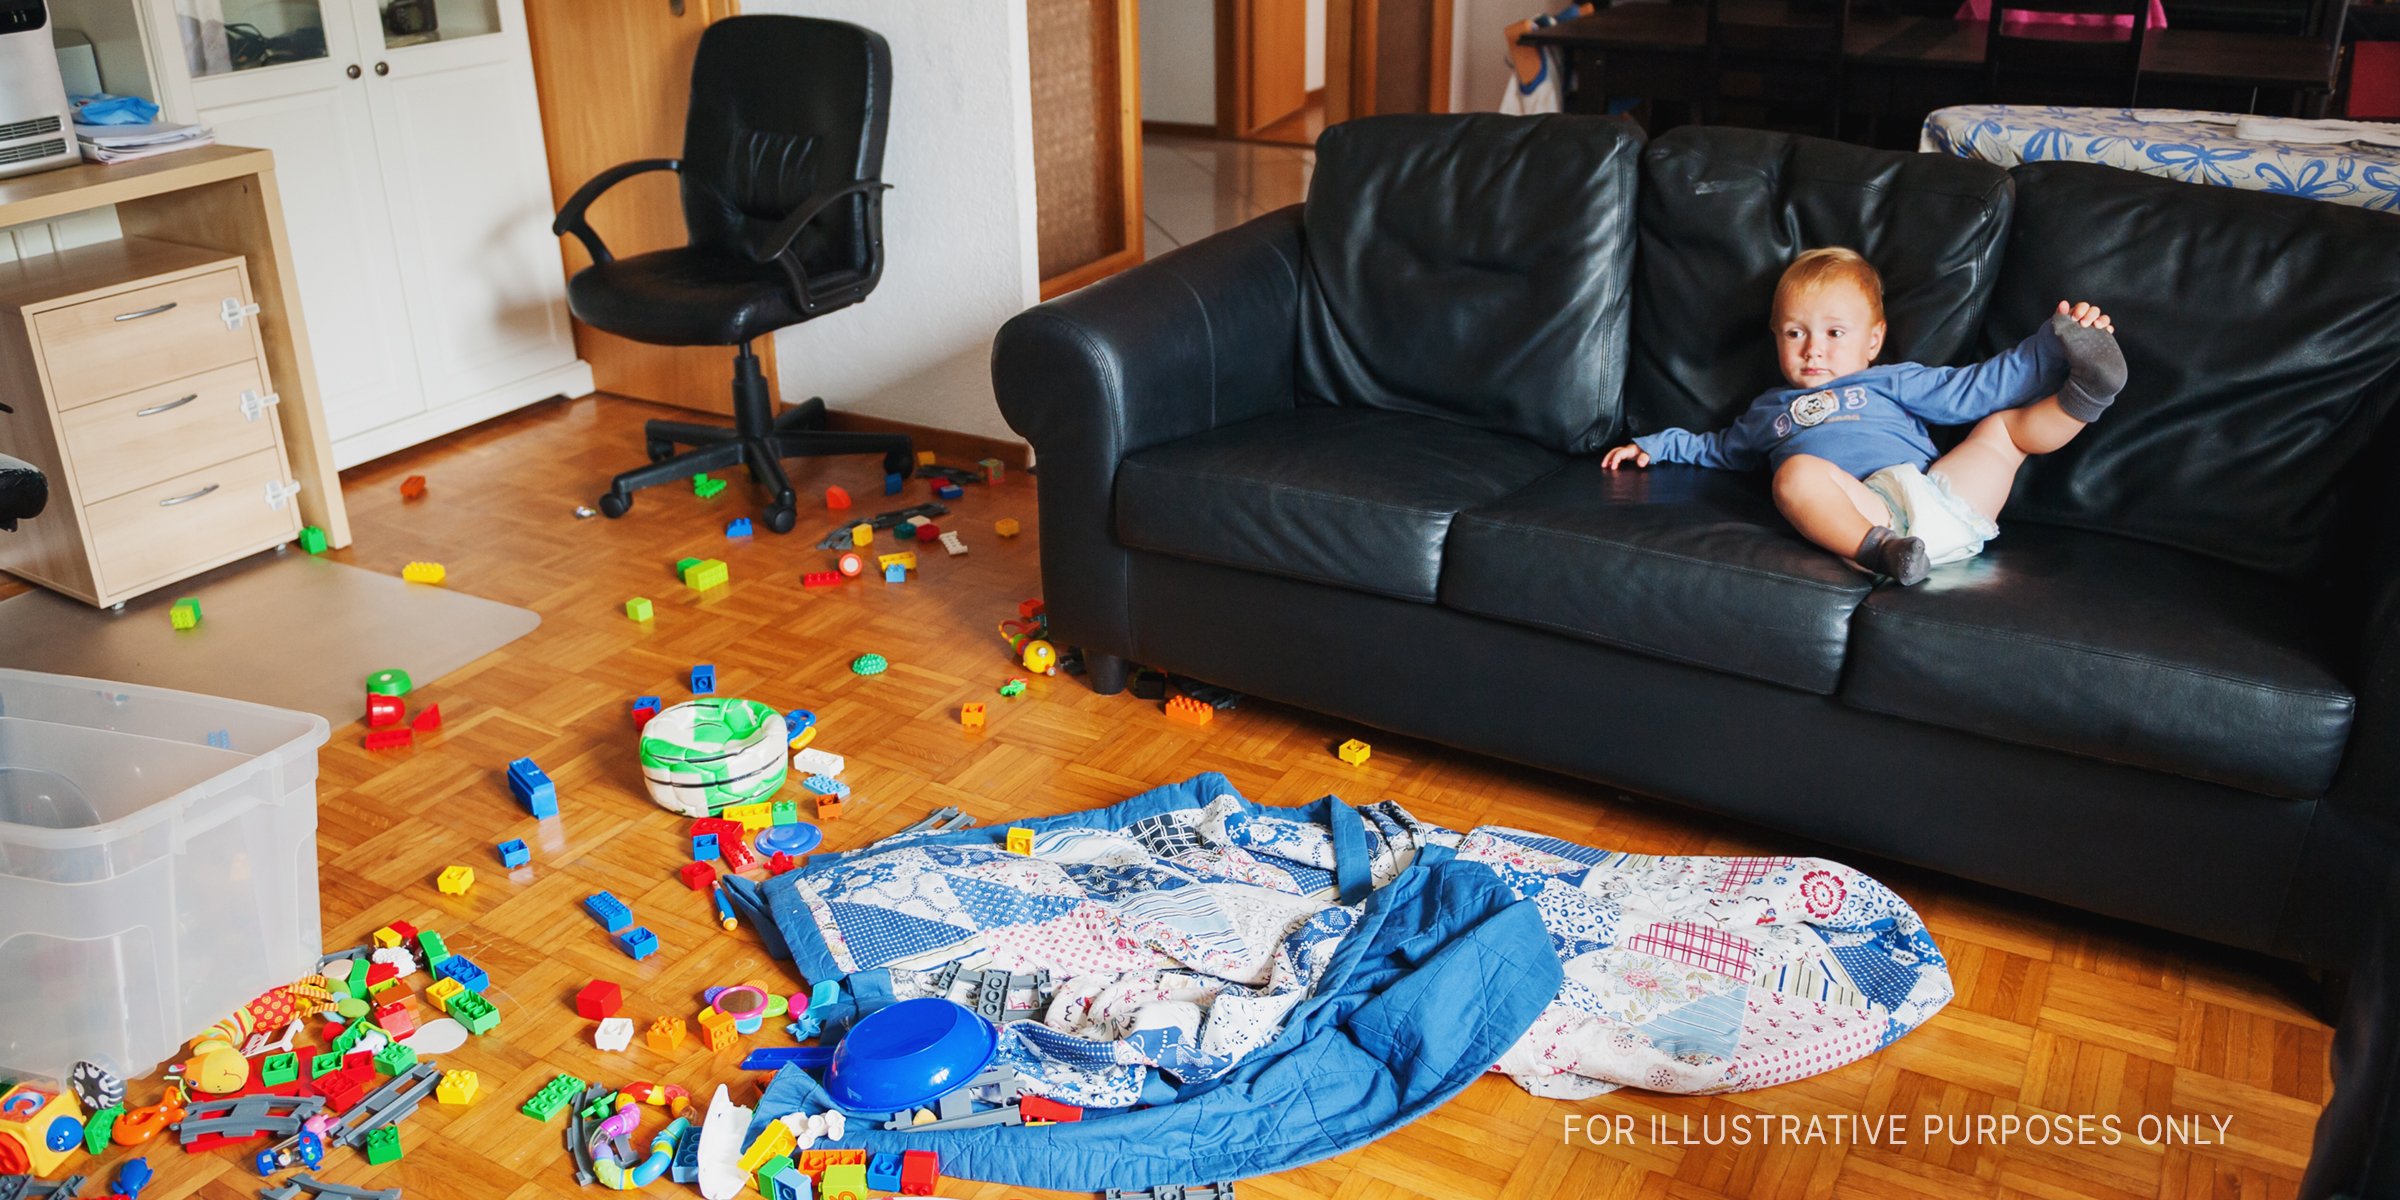 Baby lies on a couch in a messy room | Source: Shutterstock